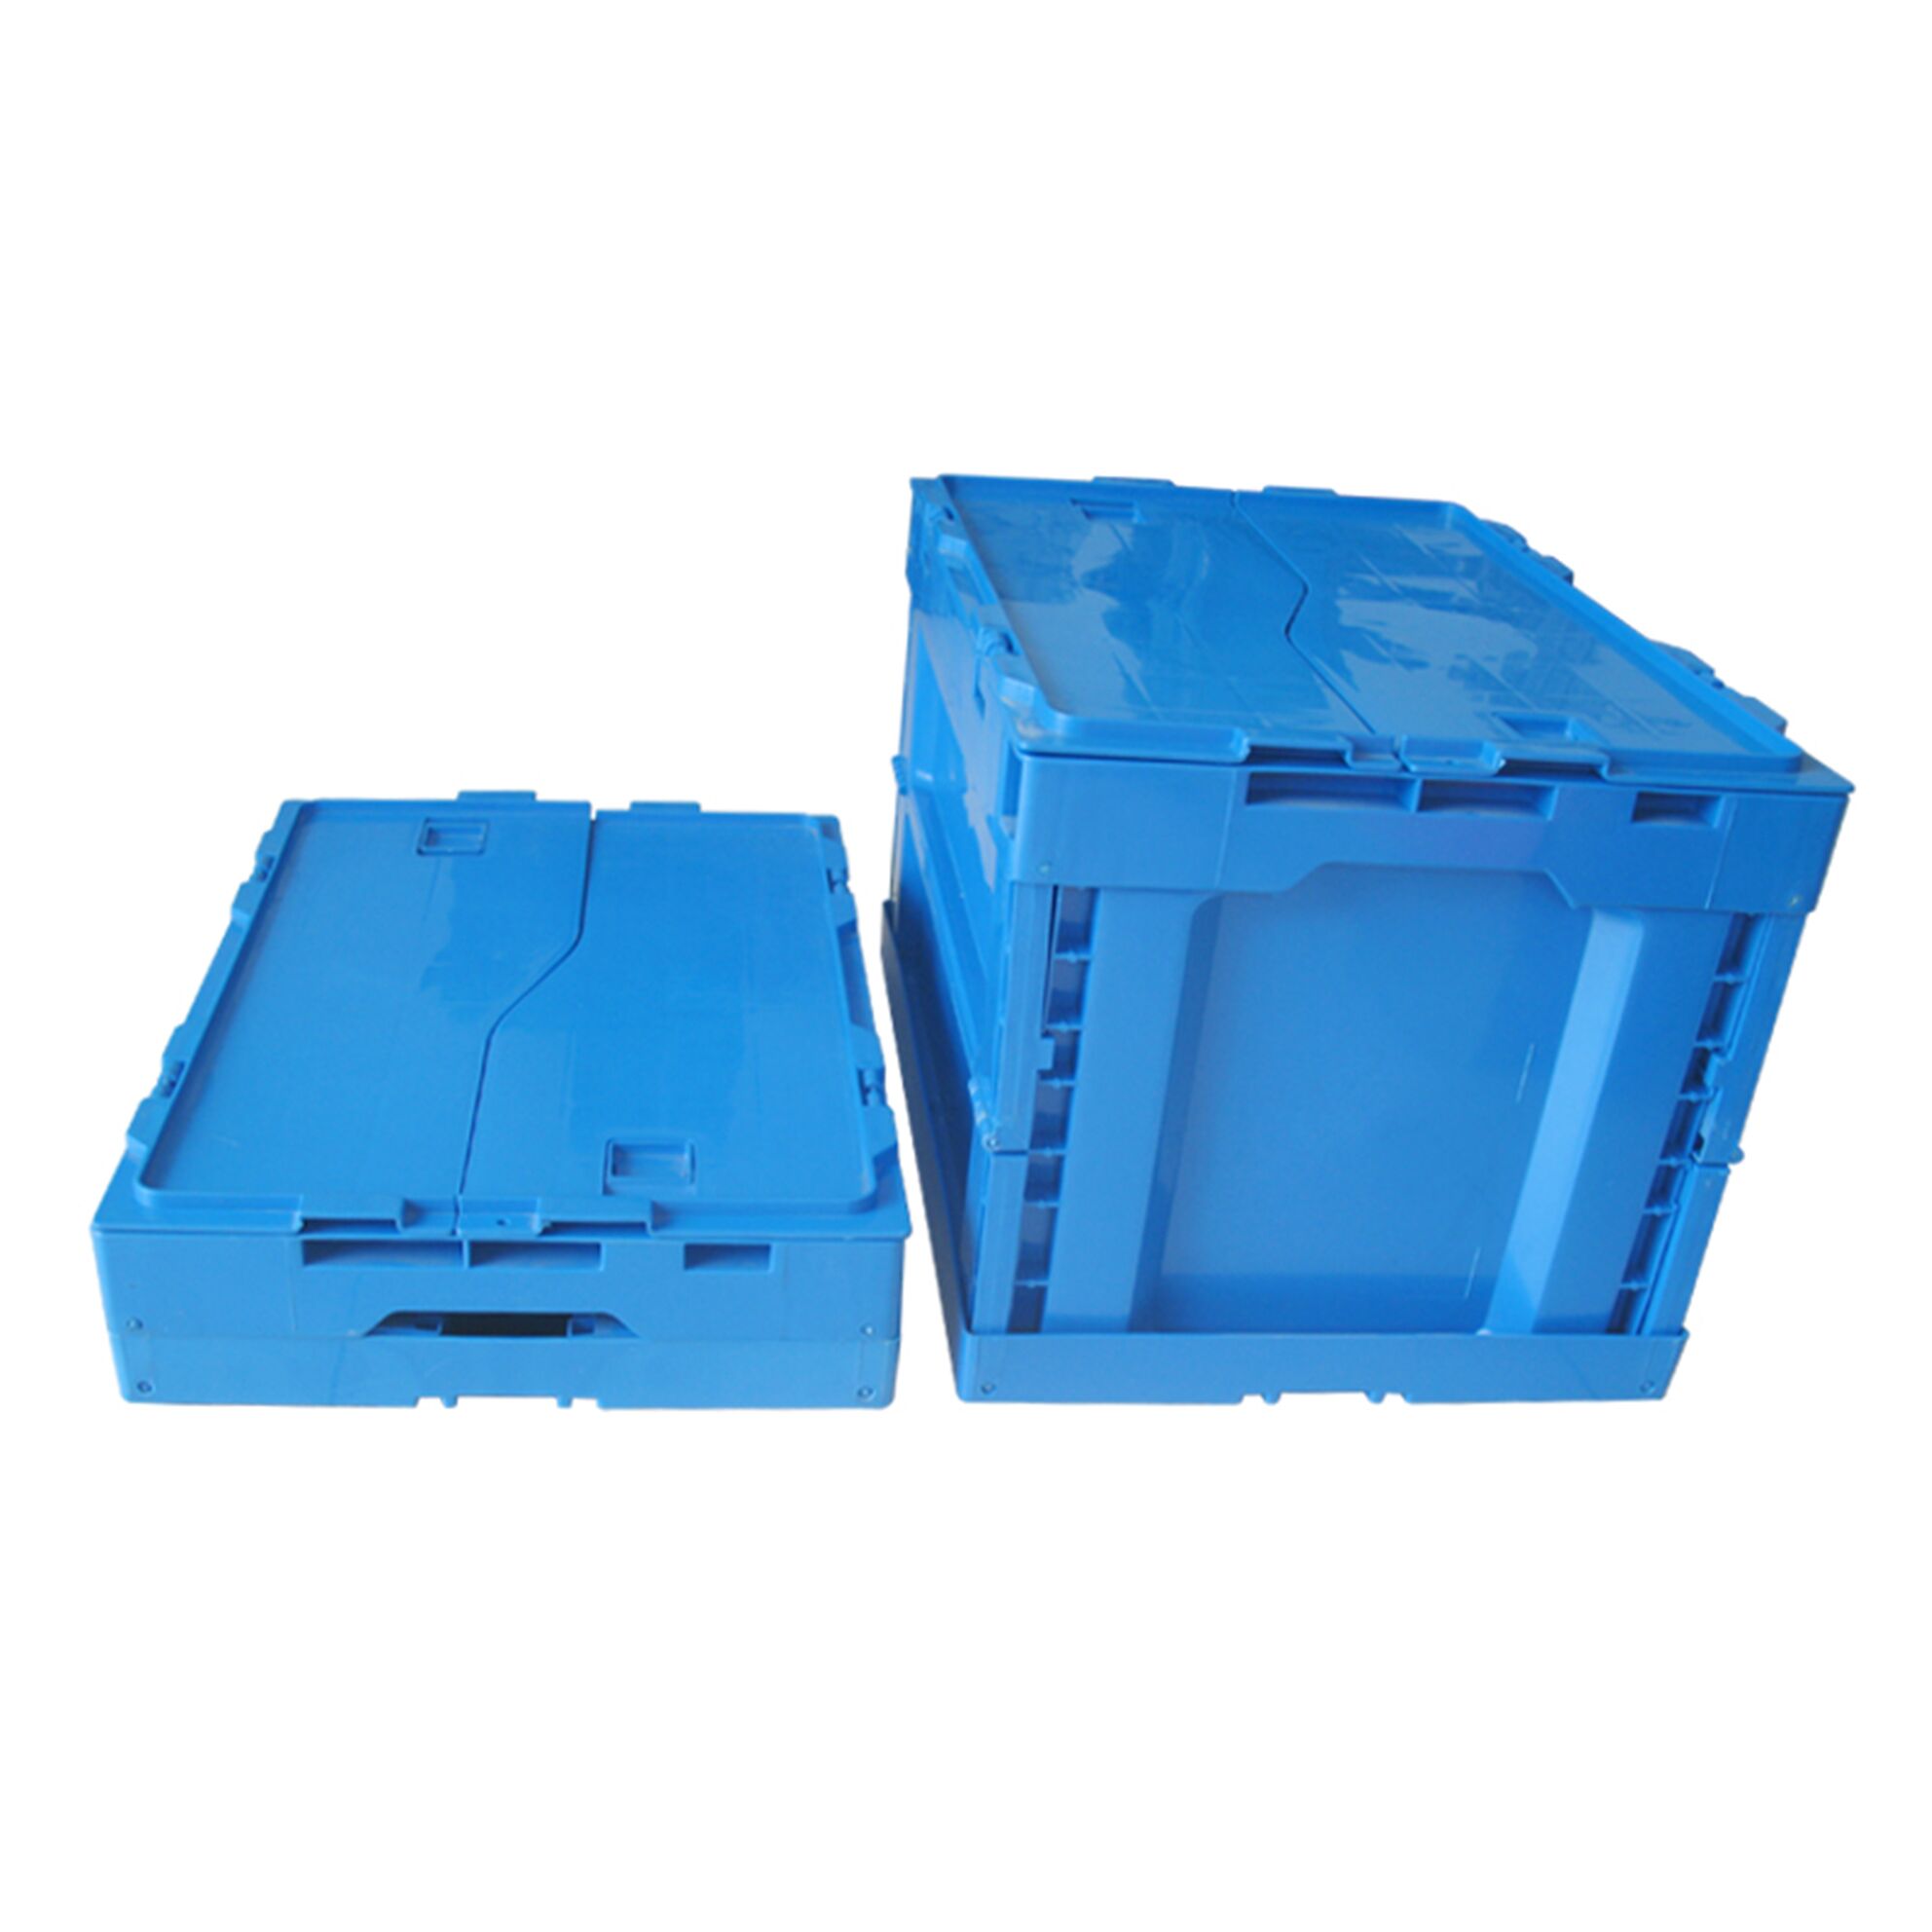 https://www.best-boxes.com/wp-content/uploads/2018/12/collapsible-plastic-container-manufacturers-3-1.jpg